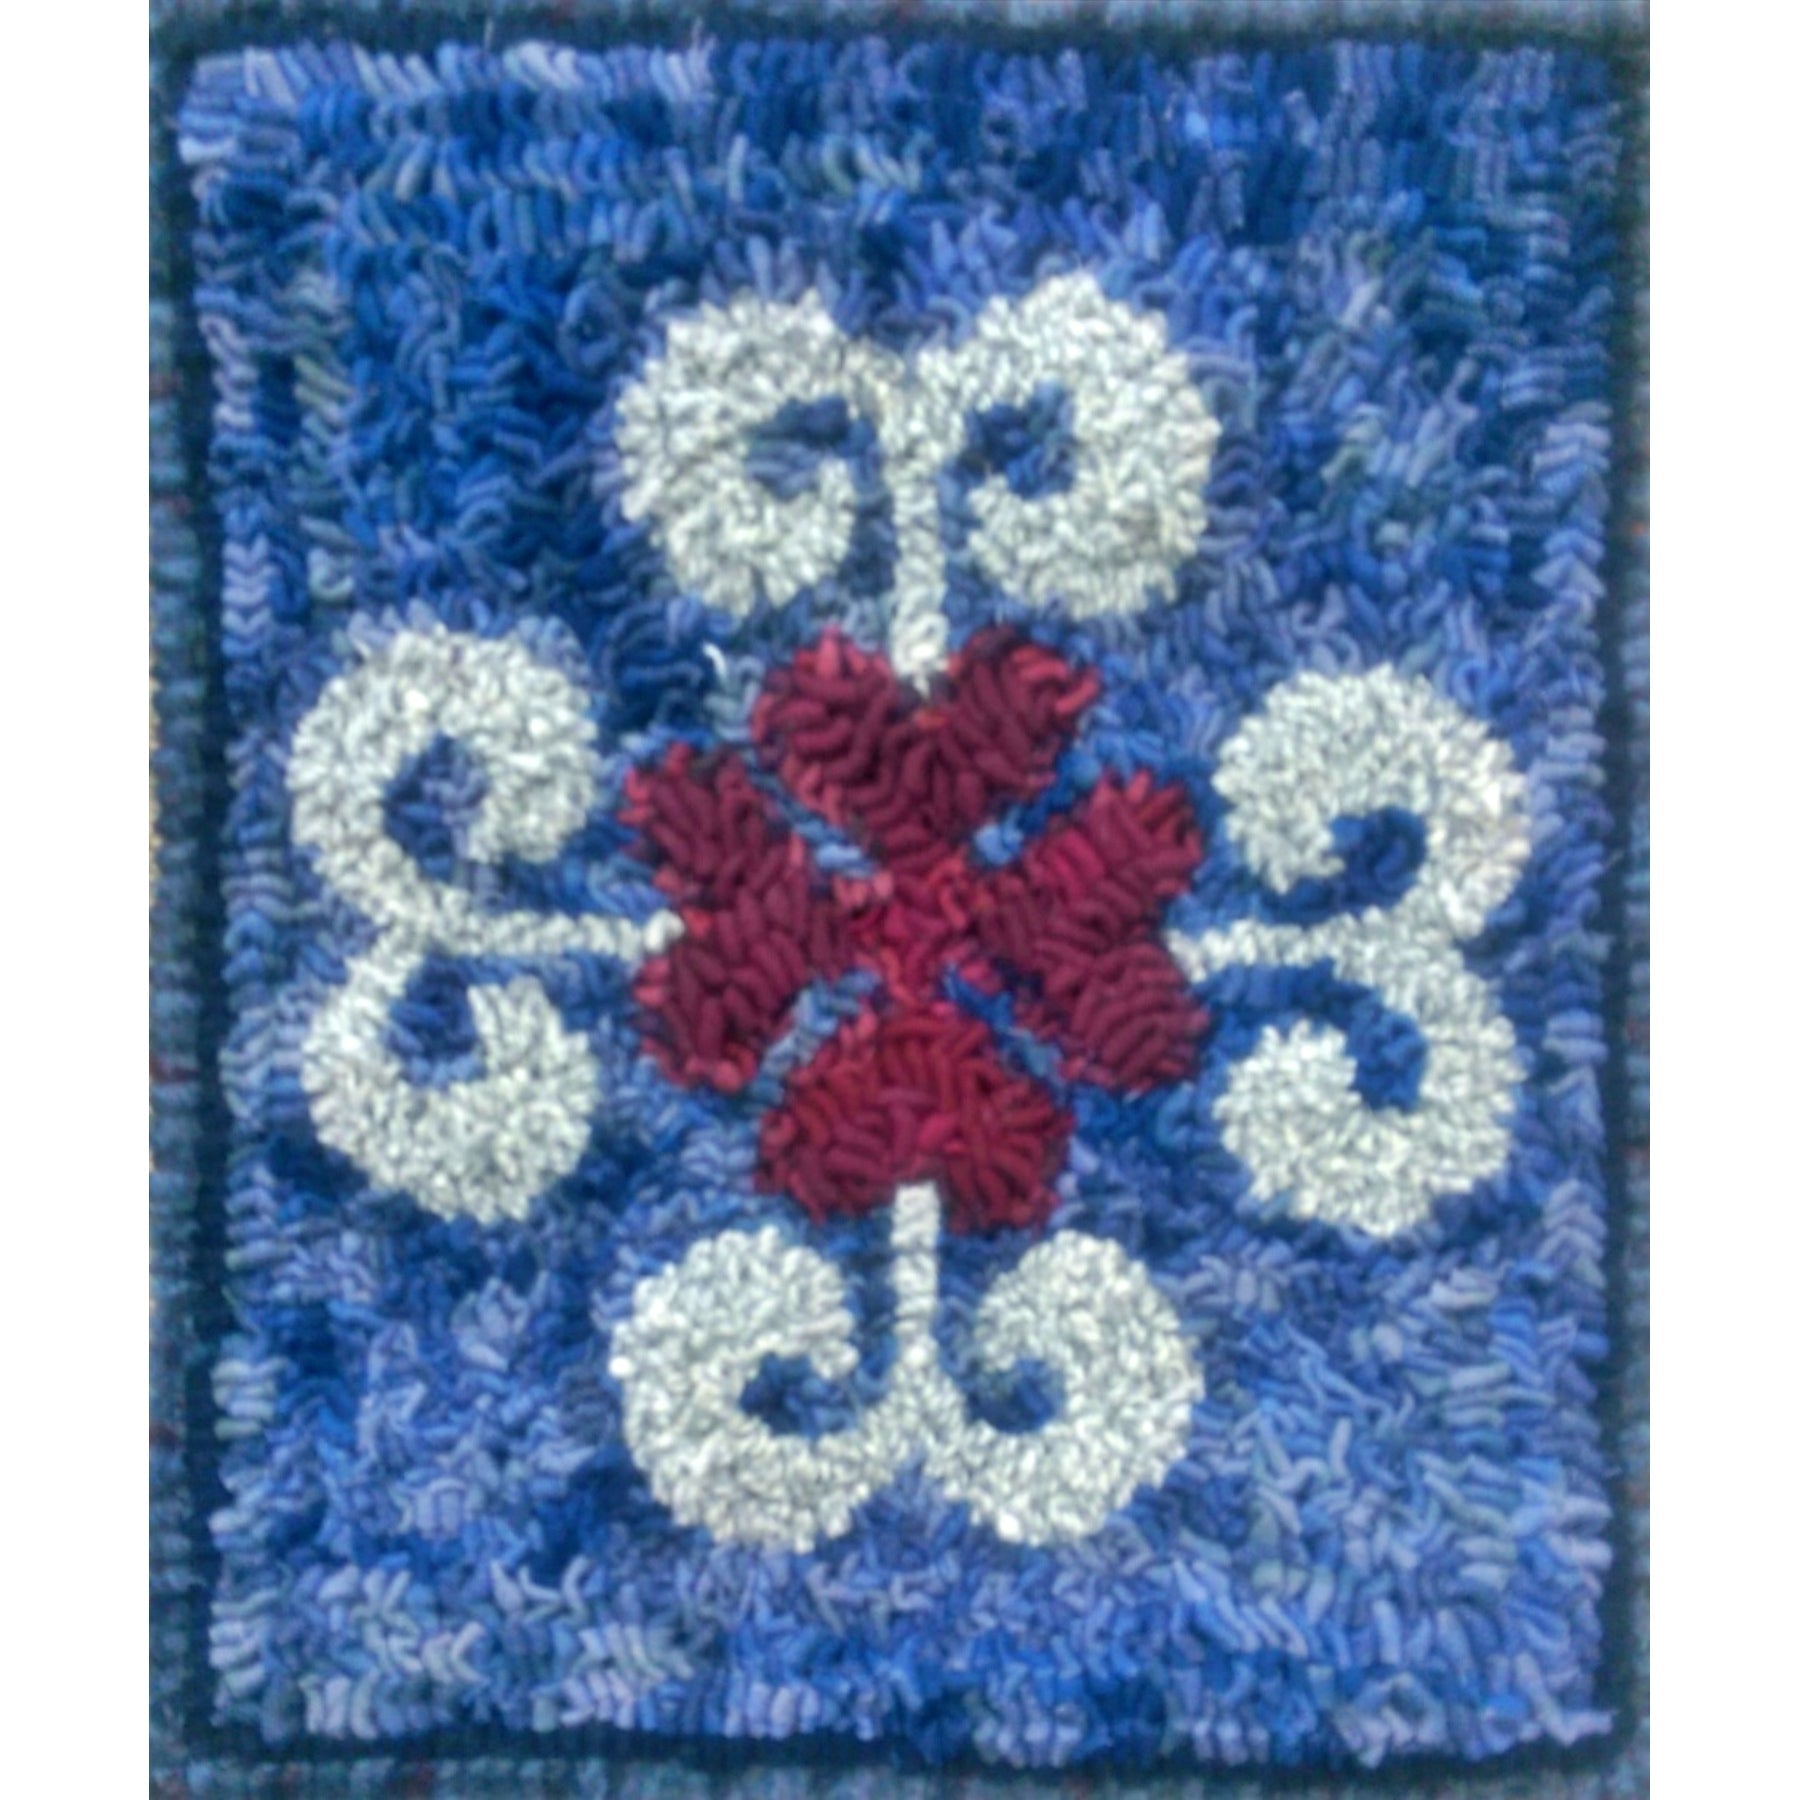 Fleur Quilt Square, rug hooked by Connie Bradley